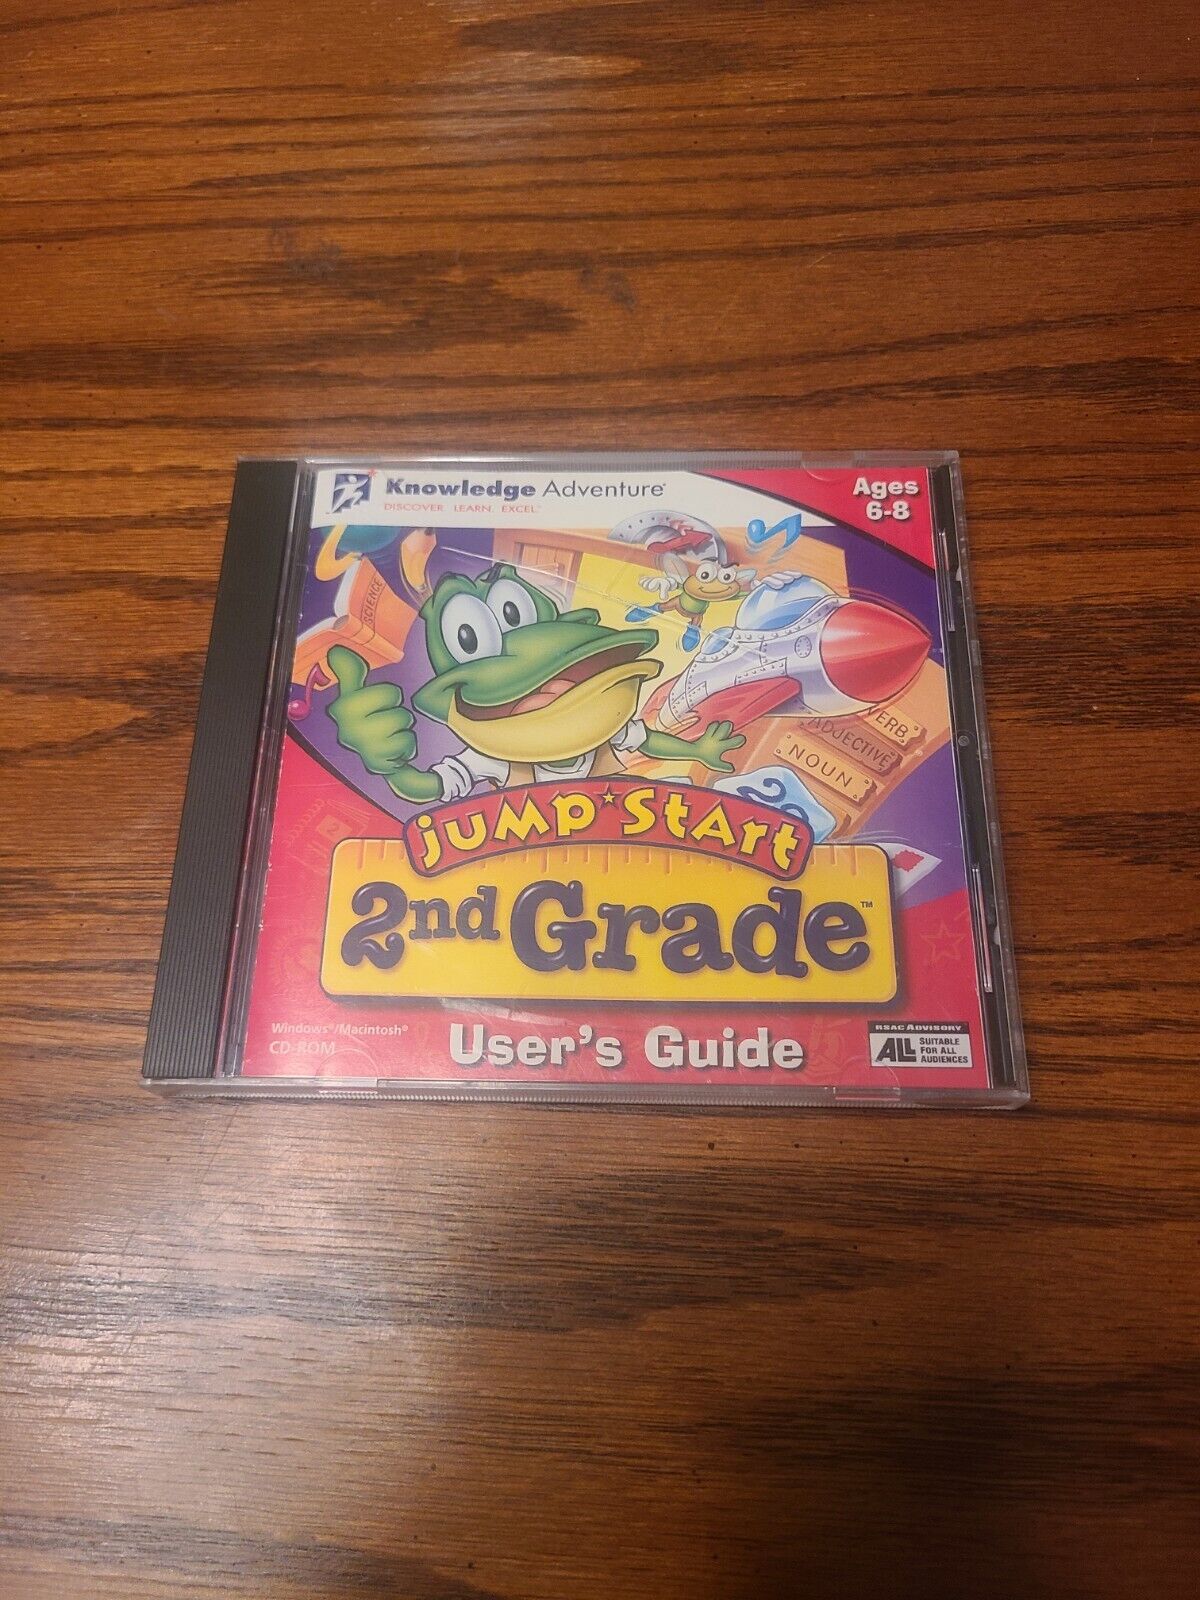 Jump Start: Learning System 2nd Grade PC CD-ROM (1996, Knowledge Adventure)